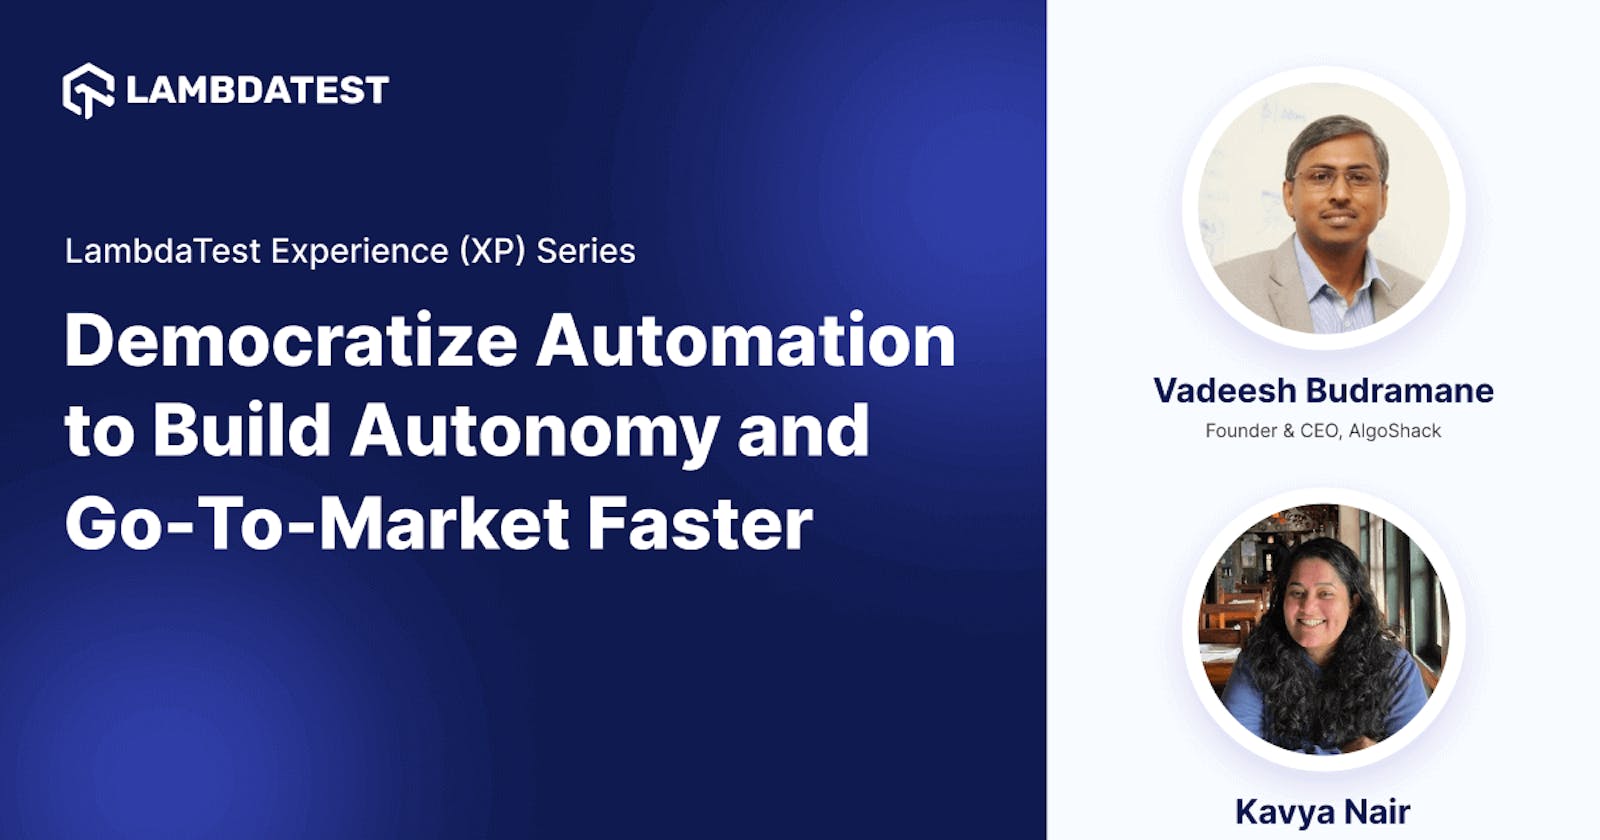 Webinar: Democratize Automation to Build Autonomy and Go-To-Market Faster [Experience (XP) Series]